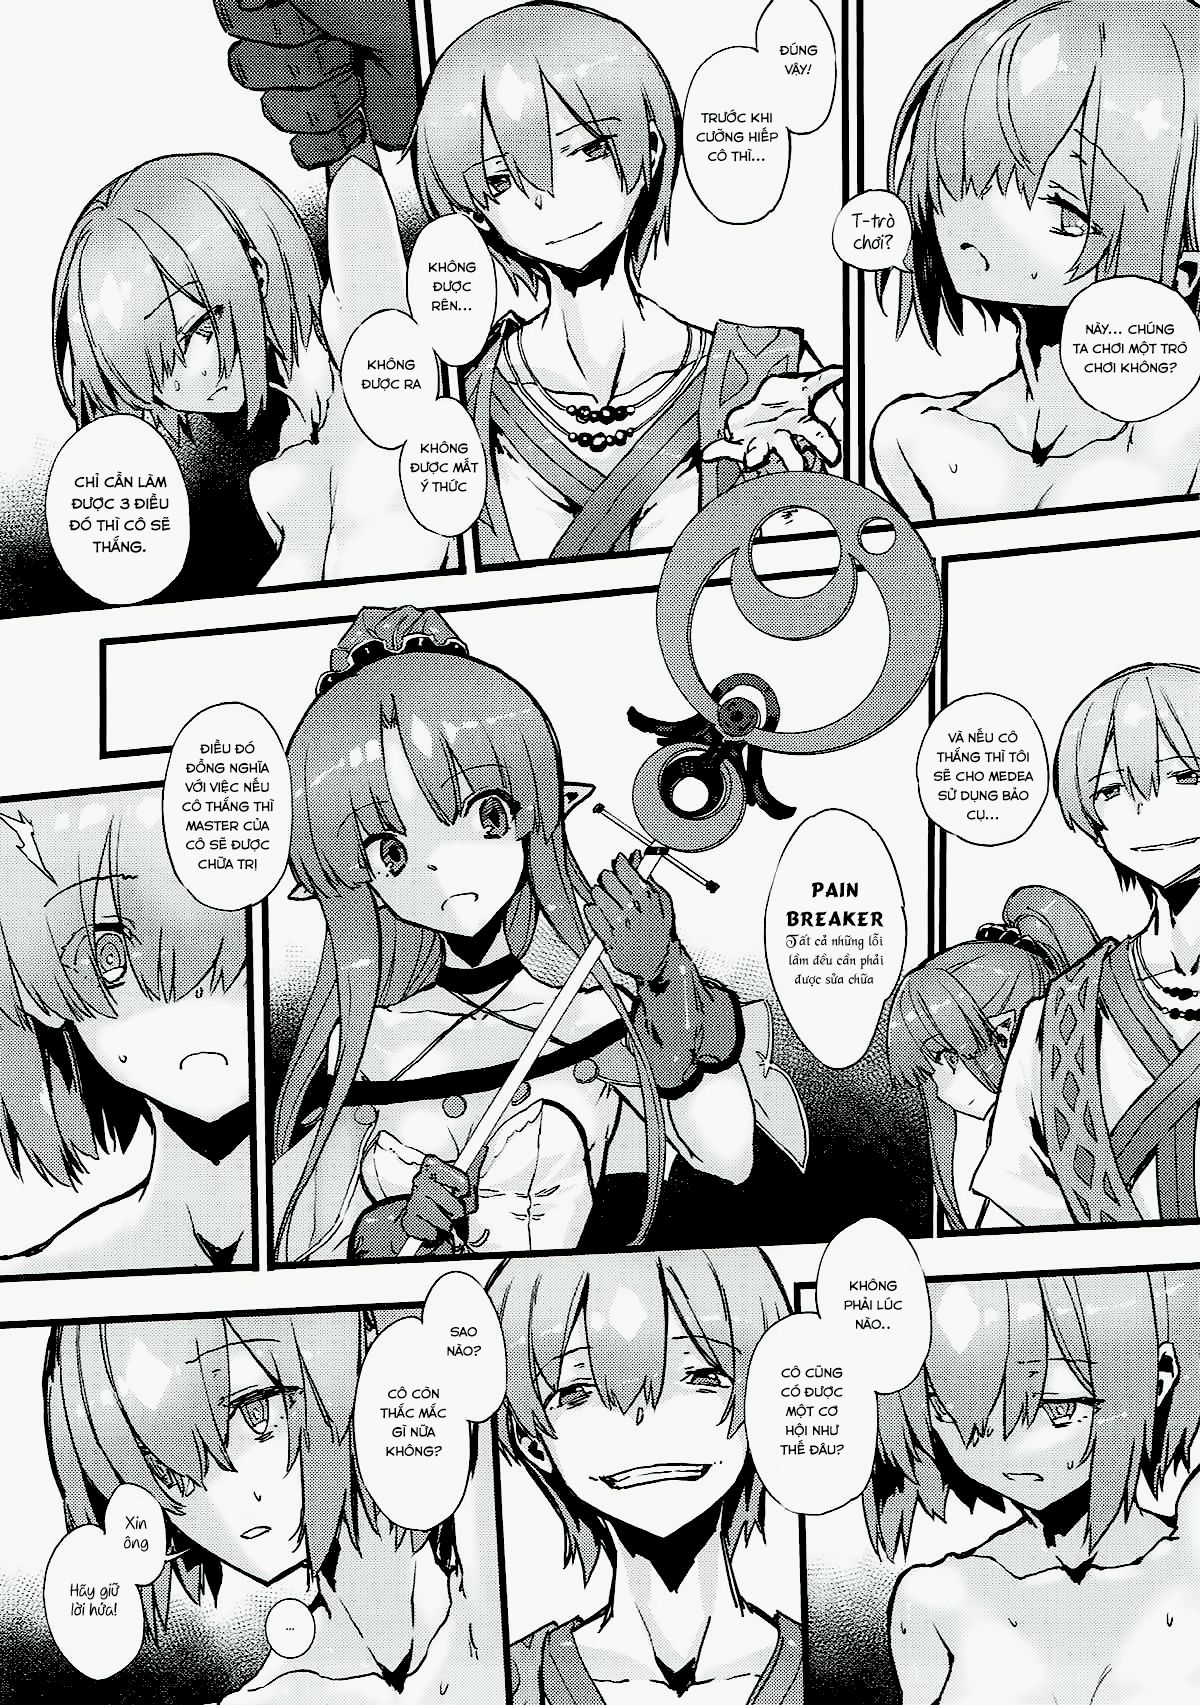 (C93) [Kenja Time (Zutta)] Bad End Catharsis Vol. 8 (Fate/Grand Order) [Vietnamese Tiếng Việt] [T.K Translation Team - Seian] (C93) [けんじゃたいむ (Zutta)] Bad End Catharsis Vol.8 (Fate/Grand Order) [ベトナム翻訳]